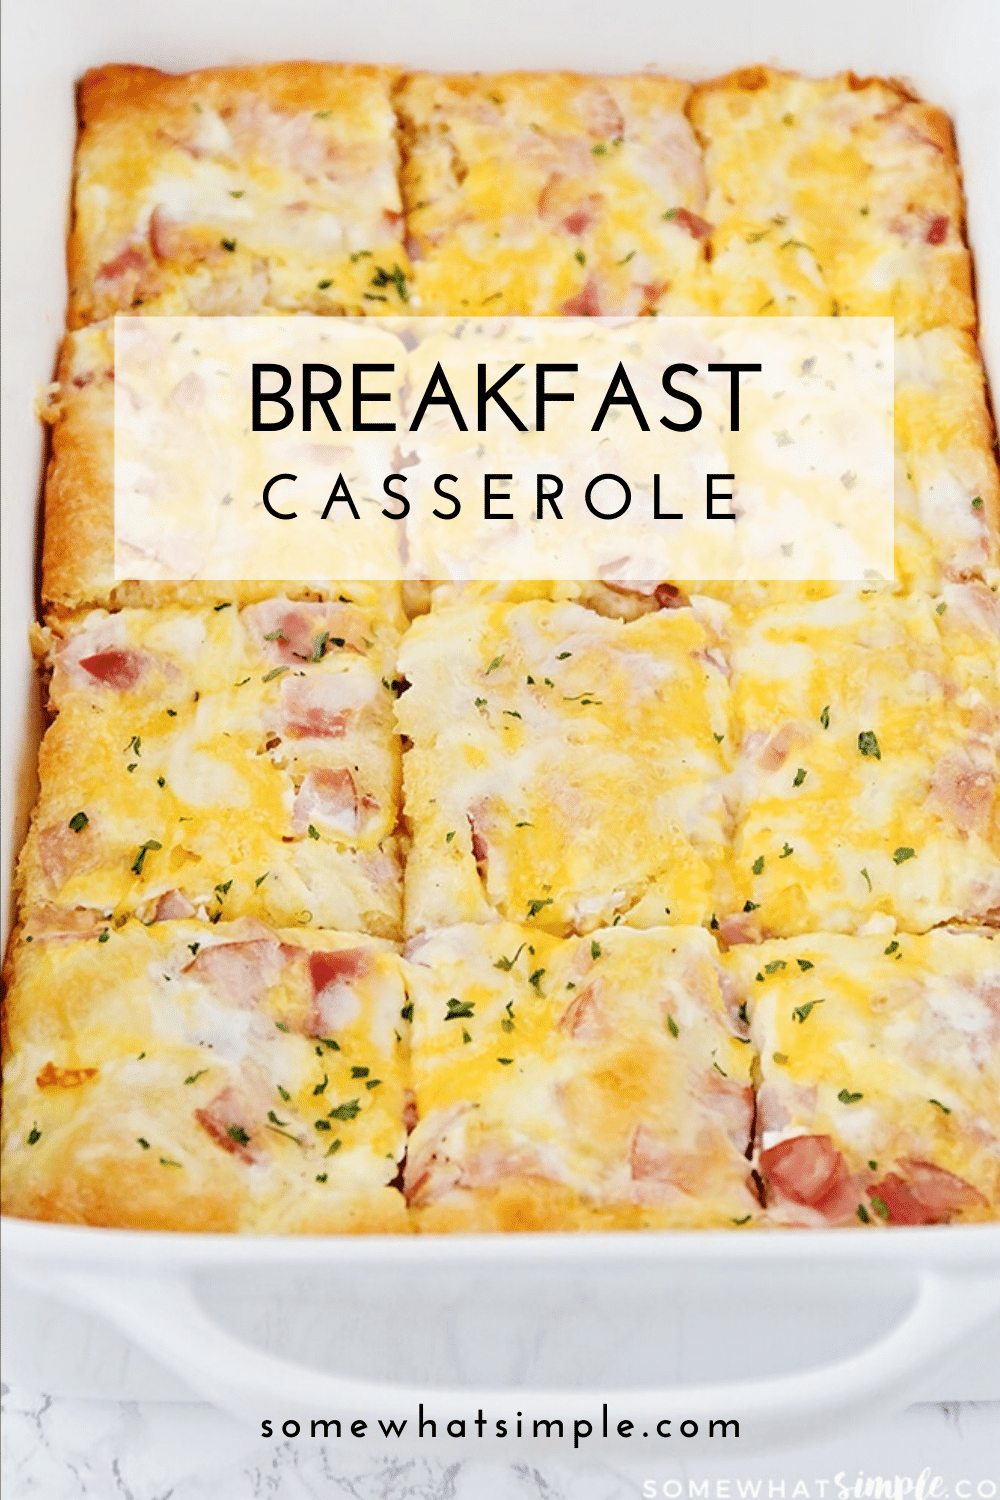 This easy croissant breakfast egg casserole recipe is an easy recipe that is perfect for either breakfast or dinner! Made with eggs, ham (or sausage) and melted cheese baked over a croissant crust that is a perfect way to start the morning! Plus, it only takes minutes to prepare, so you'll have a delicious breakfast in no time! via @somewhatsimple